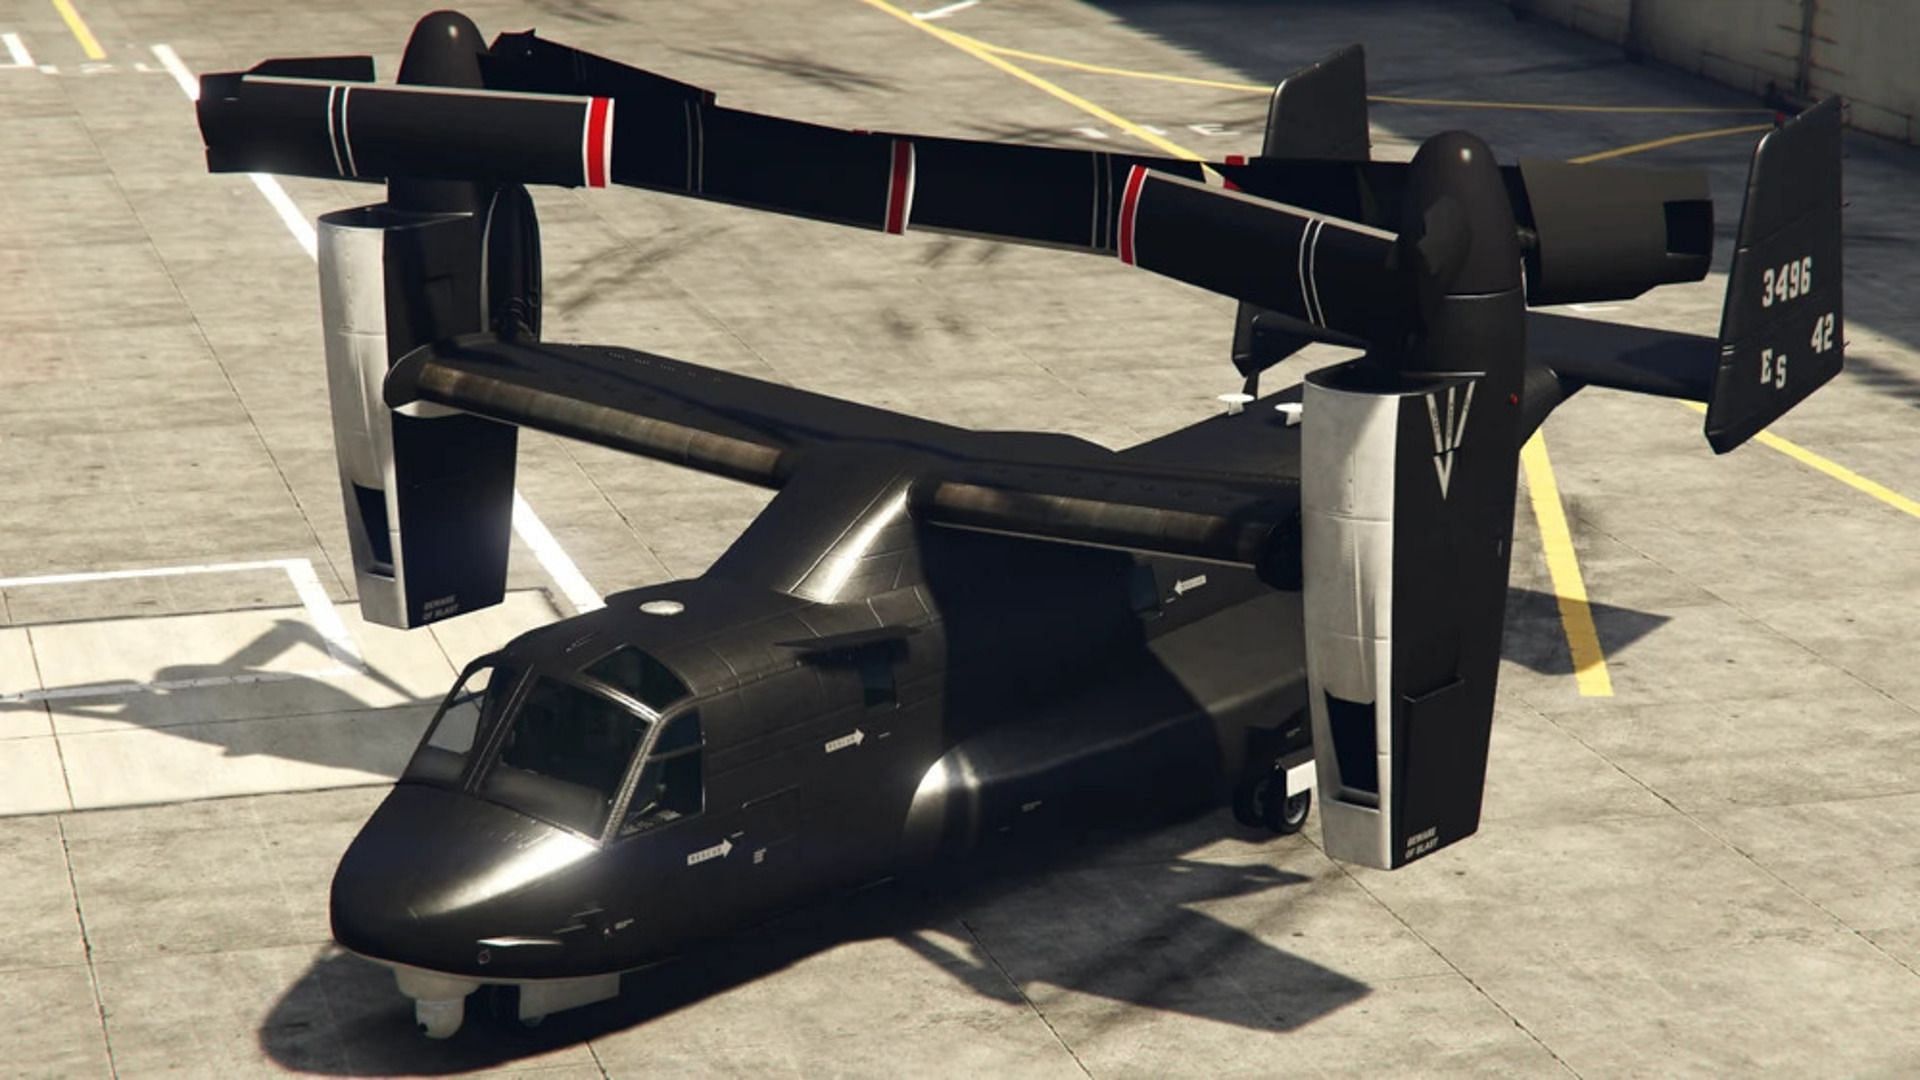 Top 5 GTA Online vehicles able to compete with Oppressor MKII